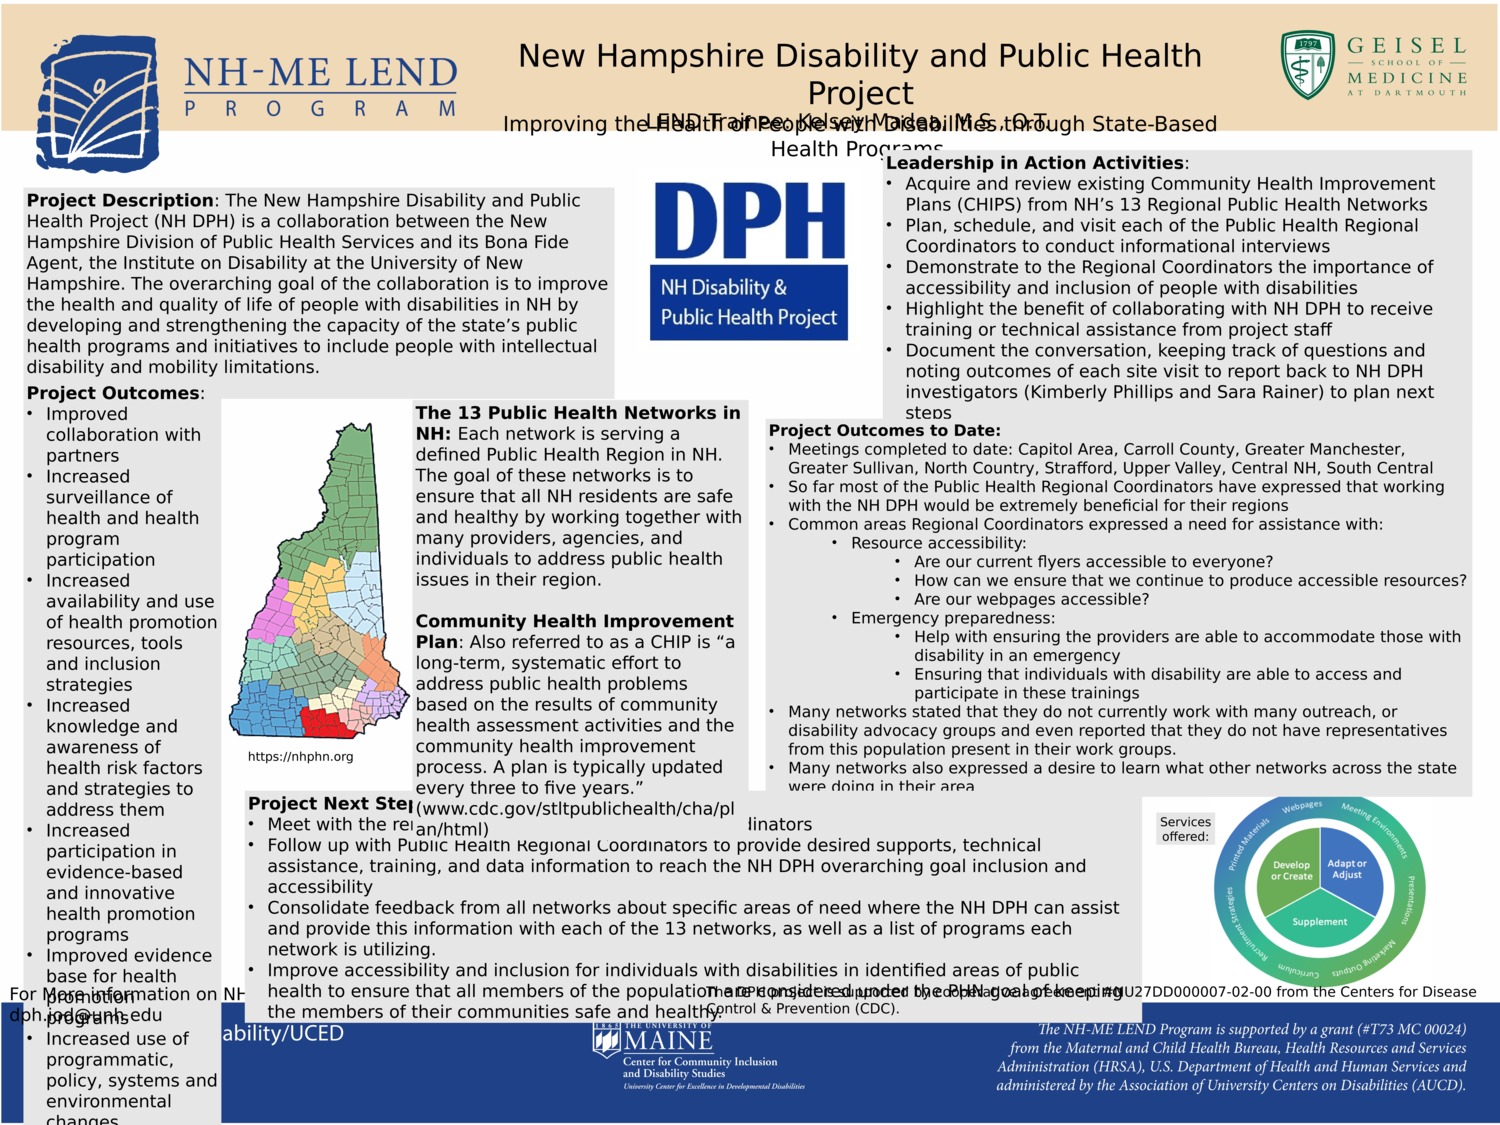 New Hampshire Disability And Public Health Project by kar293